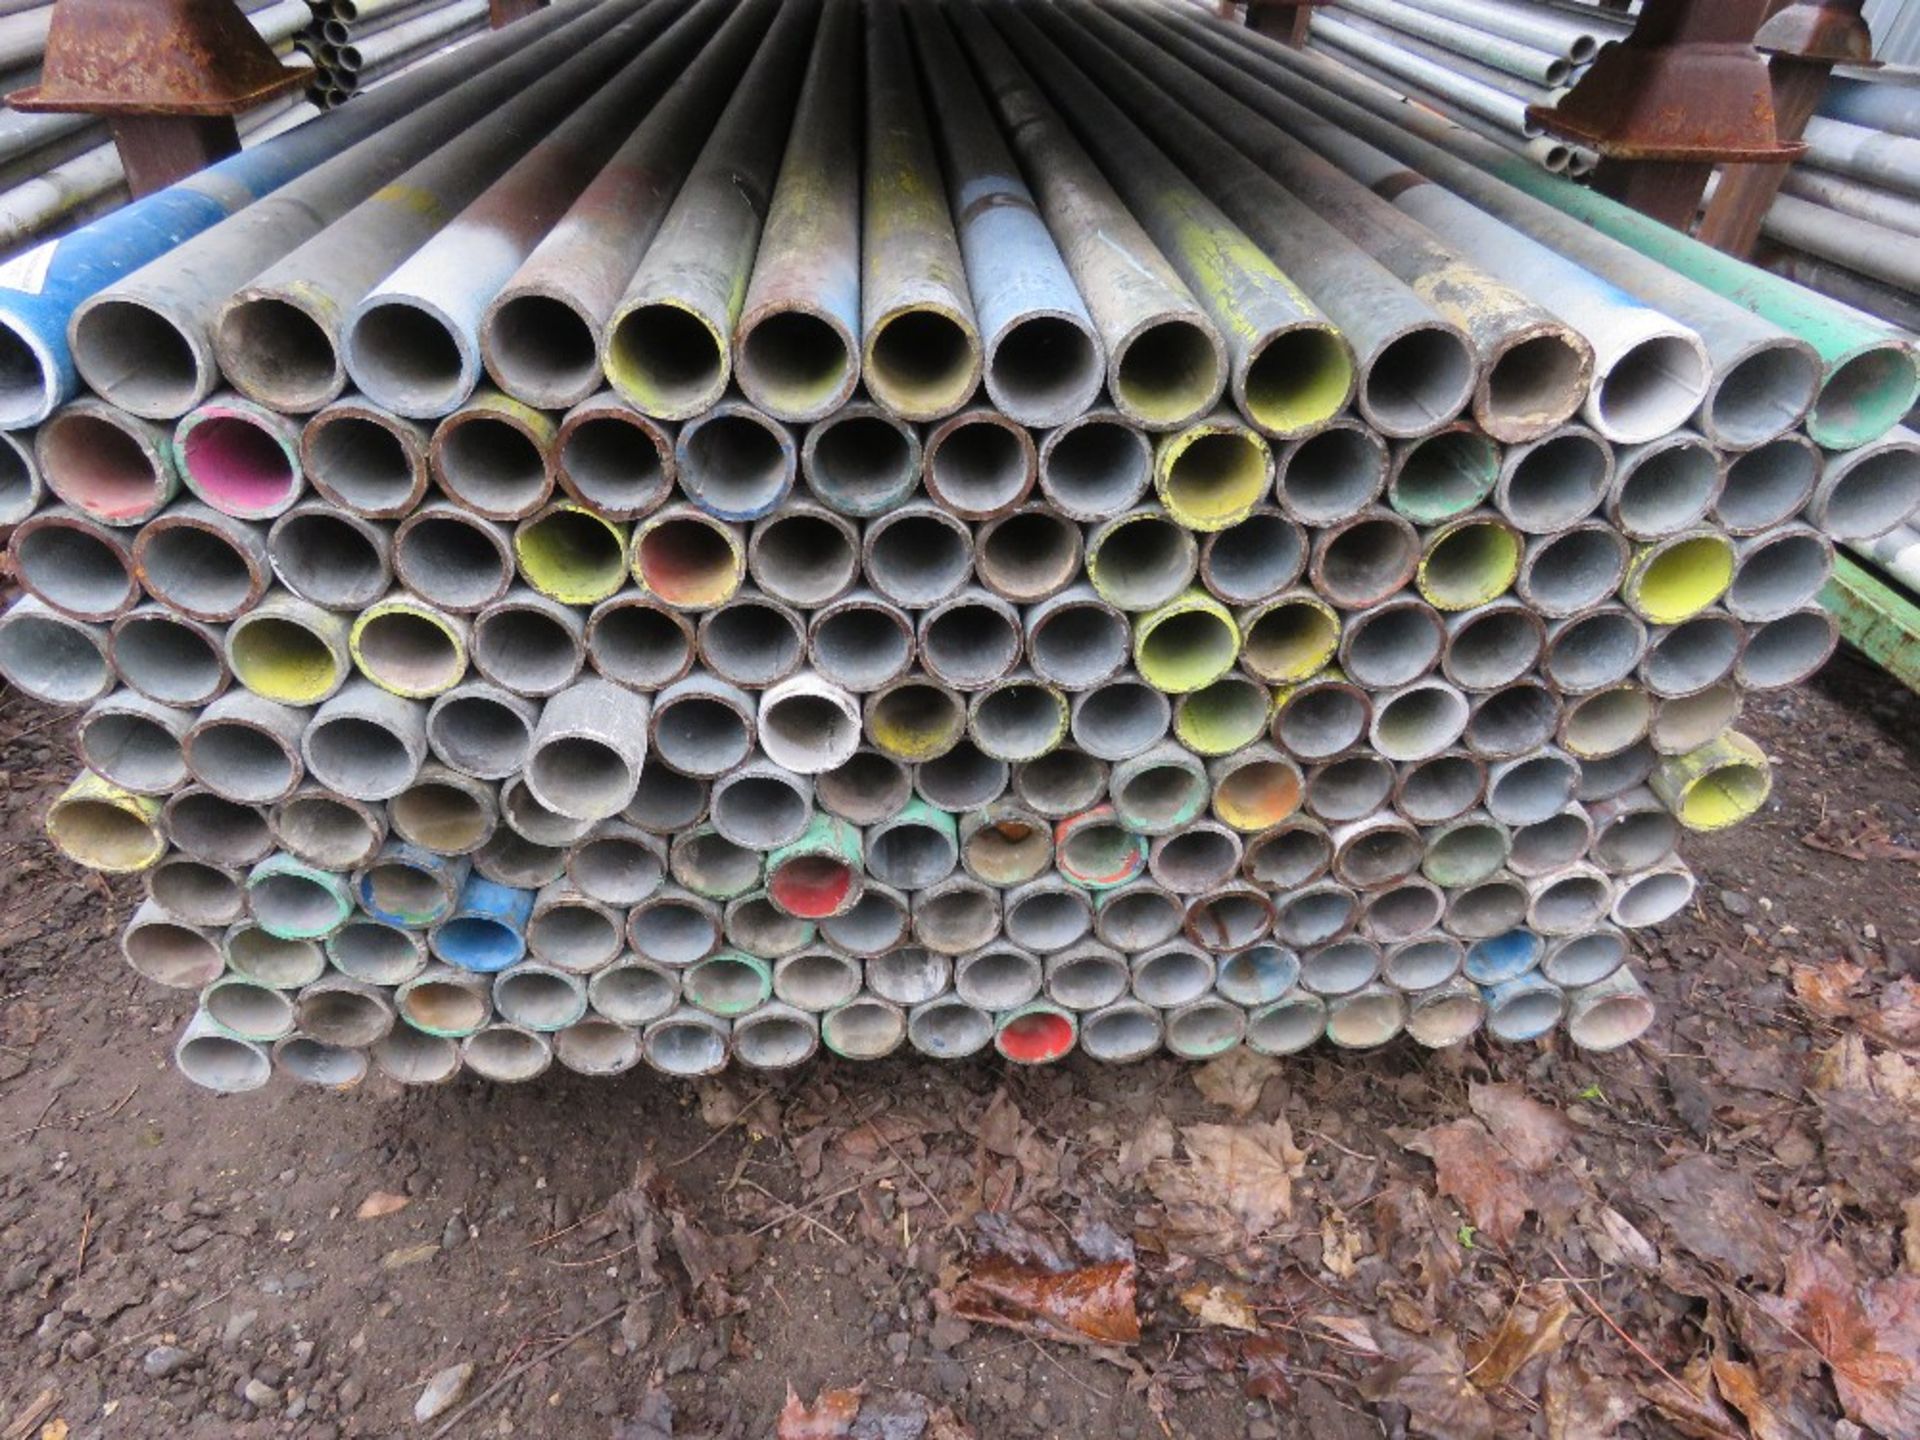 STILLAGE CONTAINING APPROXIMATELY 165NO STEEL SCAFFOLD TUBES, 5FT LENGTH APPROX.